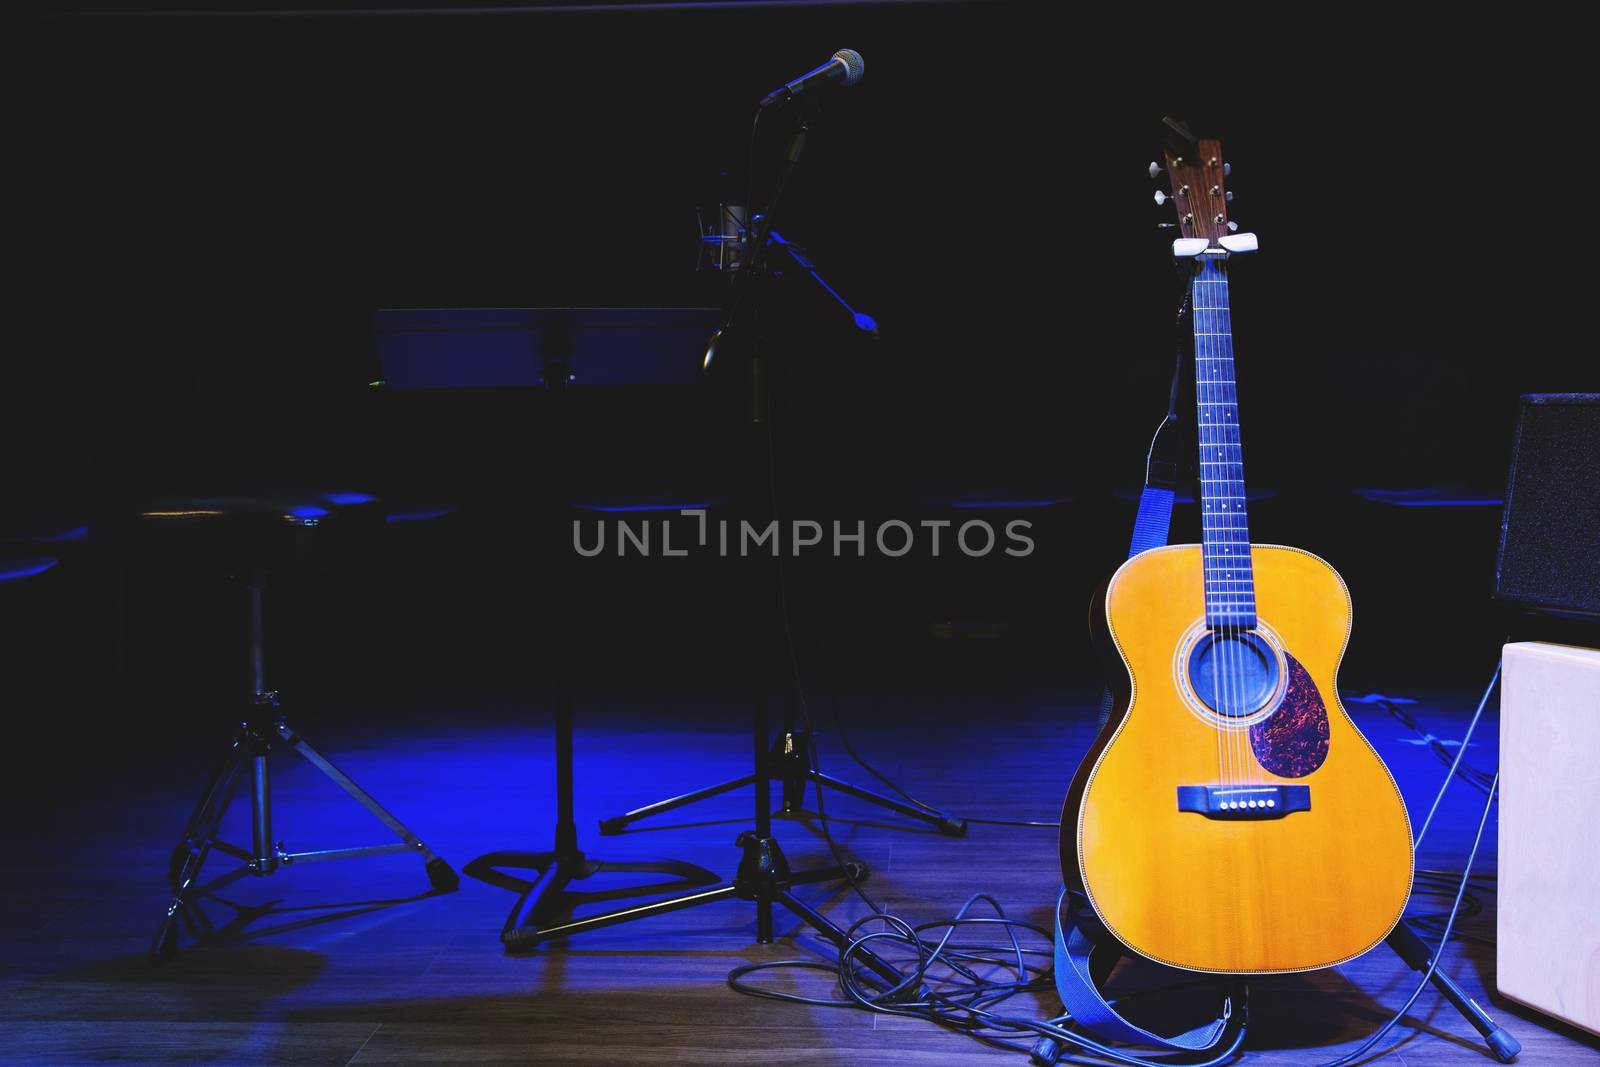 Acoustic guitar. Musical instrument with on stage in Concert.